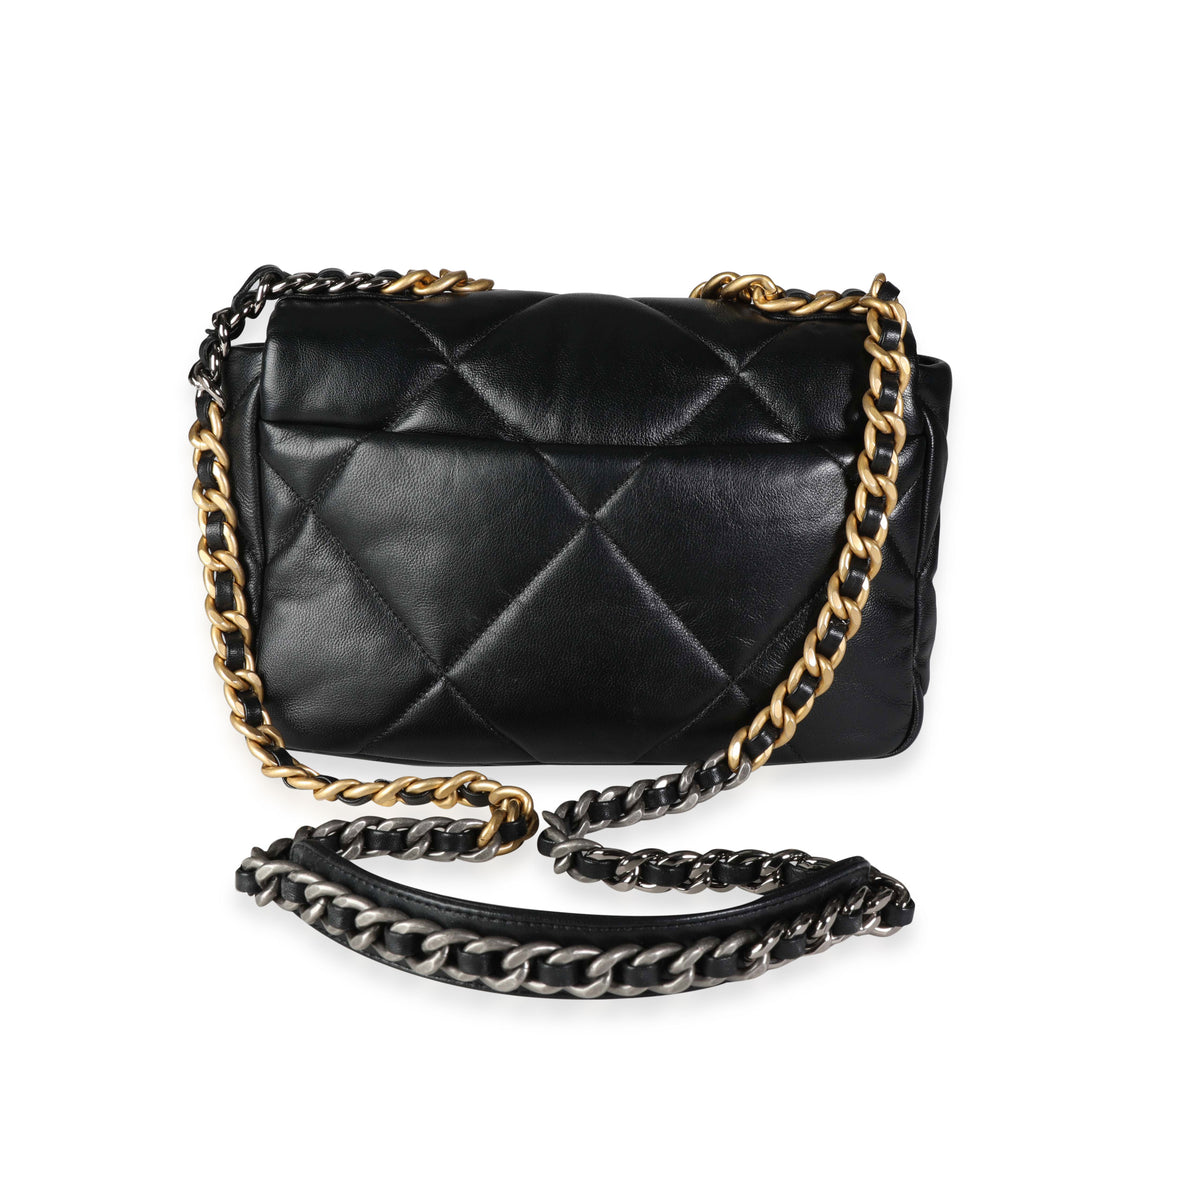 Chanel Black Quilted Lambskin Large Chanel 19 Flap Bag, myGemma, NL